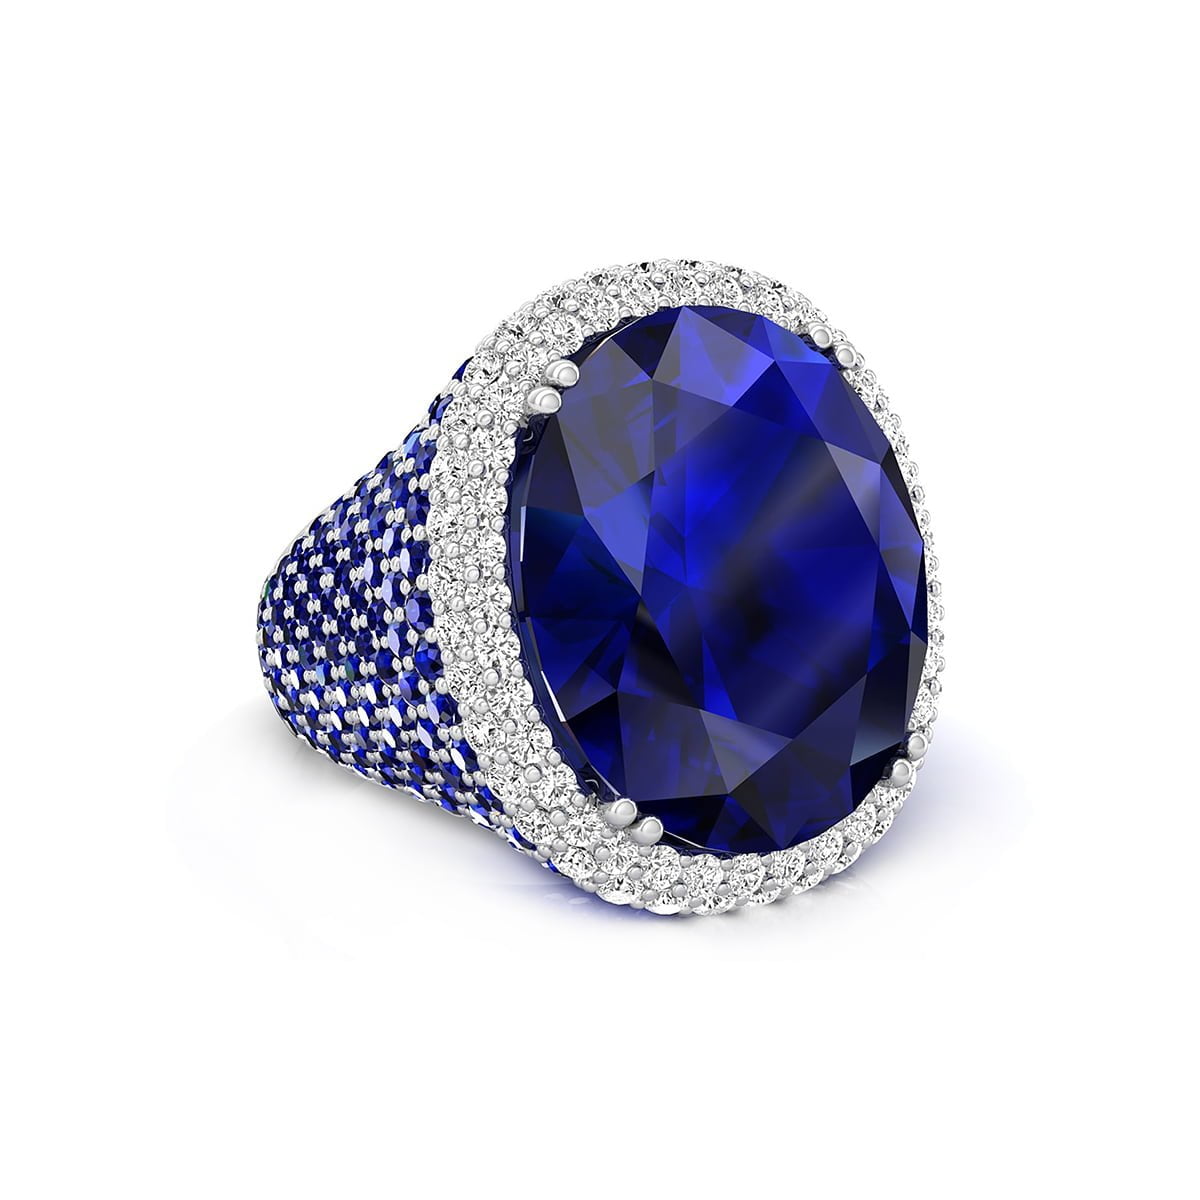 23x19 MM Large Sapphire Blue Oval With Round Cut CZ Stone Party Wear Cocktail Ring For Women